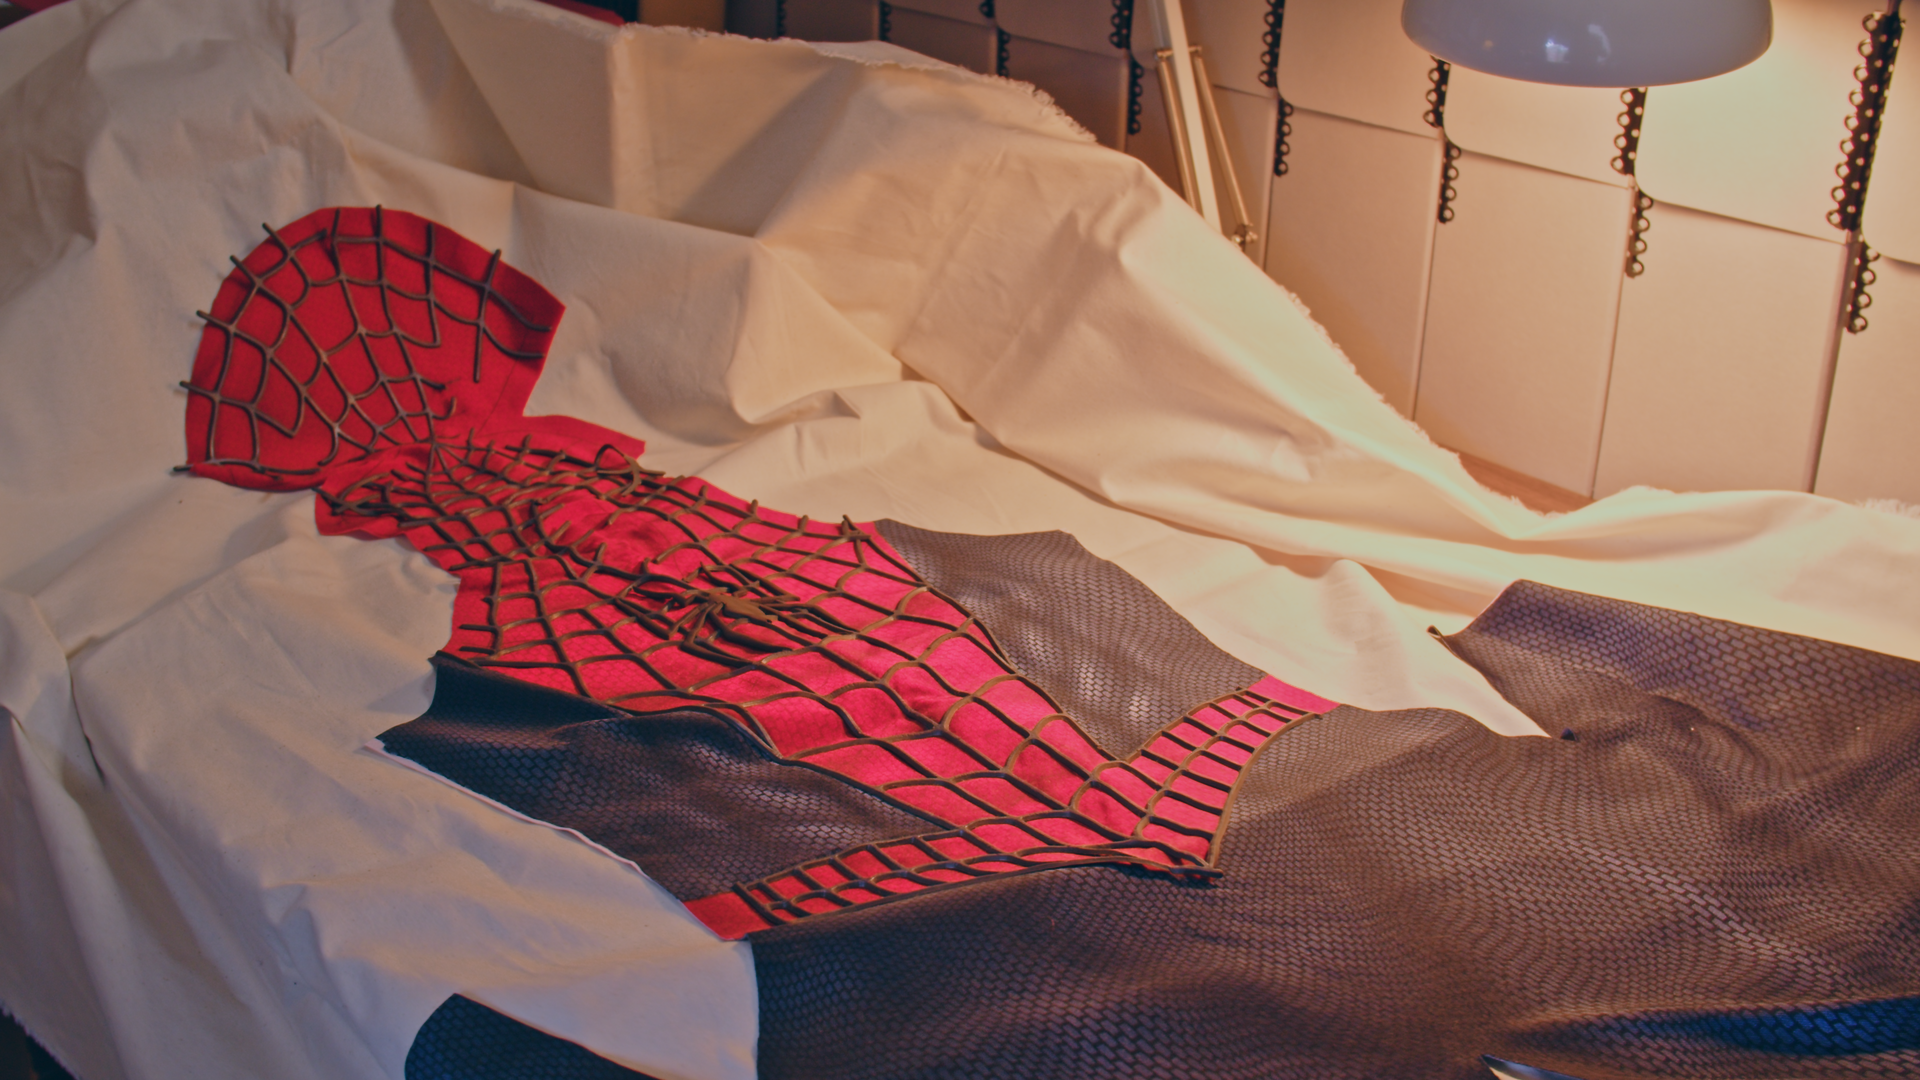 A Spider-Man suit placed on a white sheet.